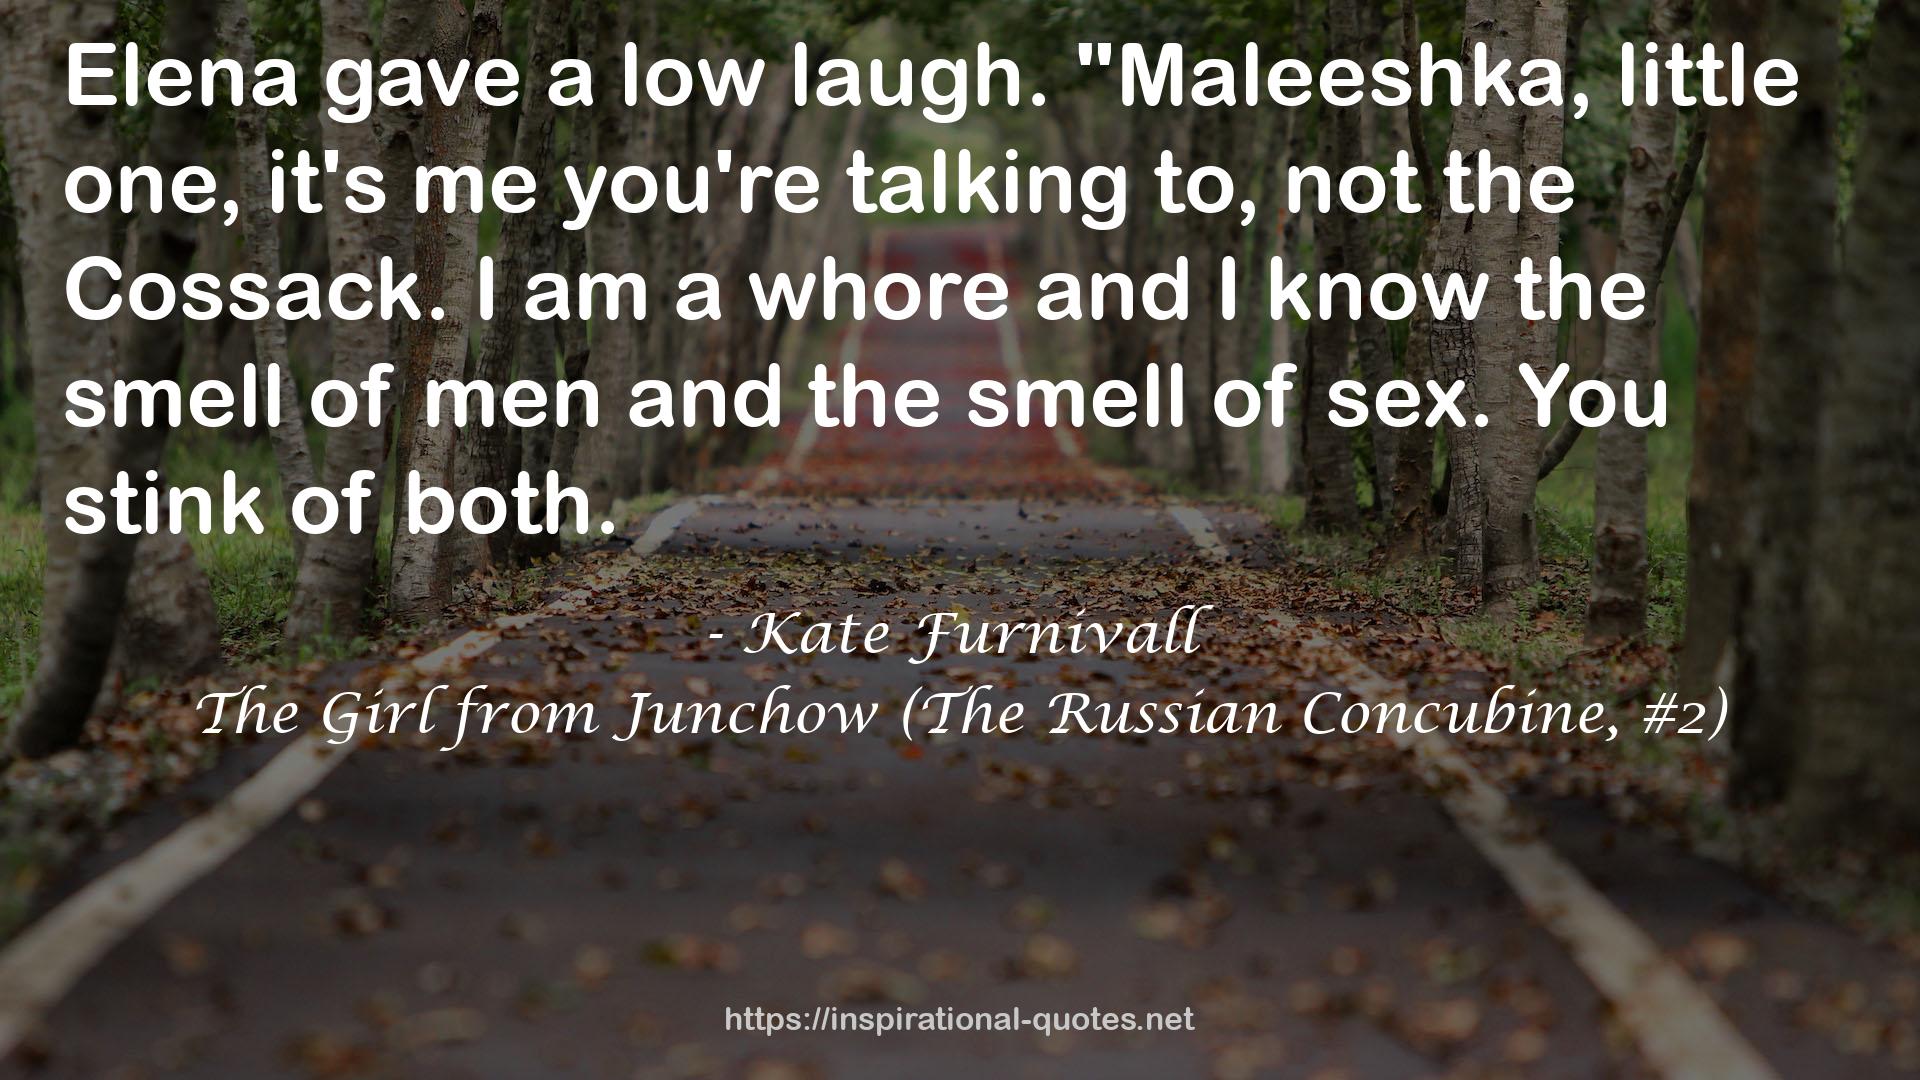 The Girl from Junchow (The Russian Concubine, #2) QUOTES